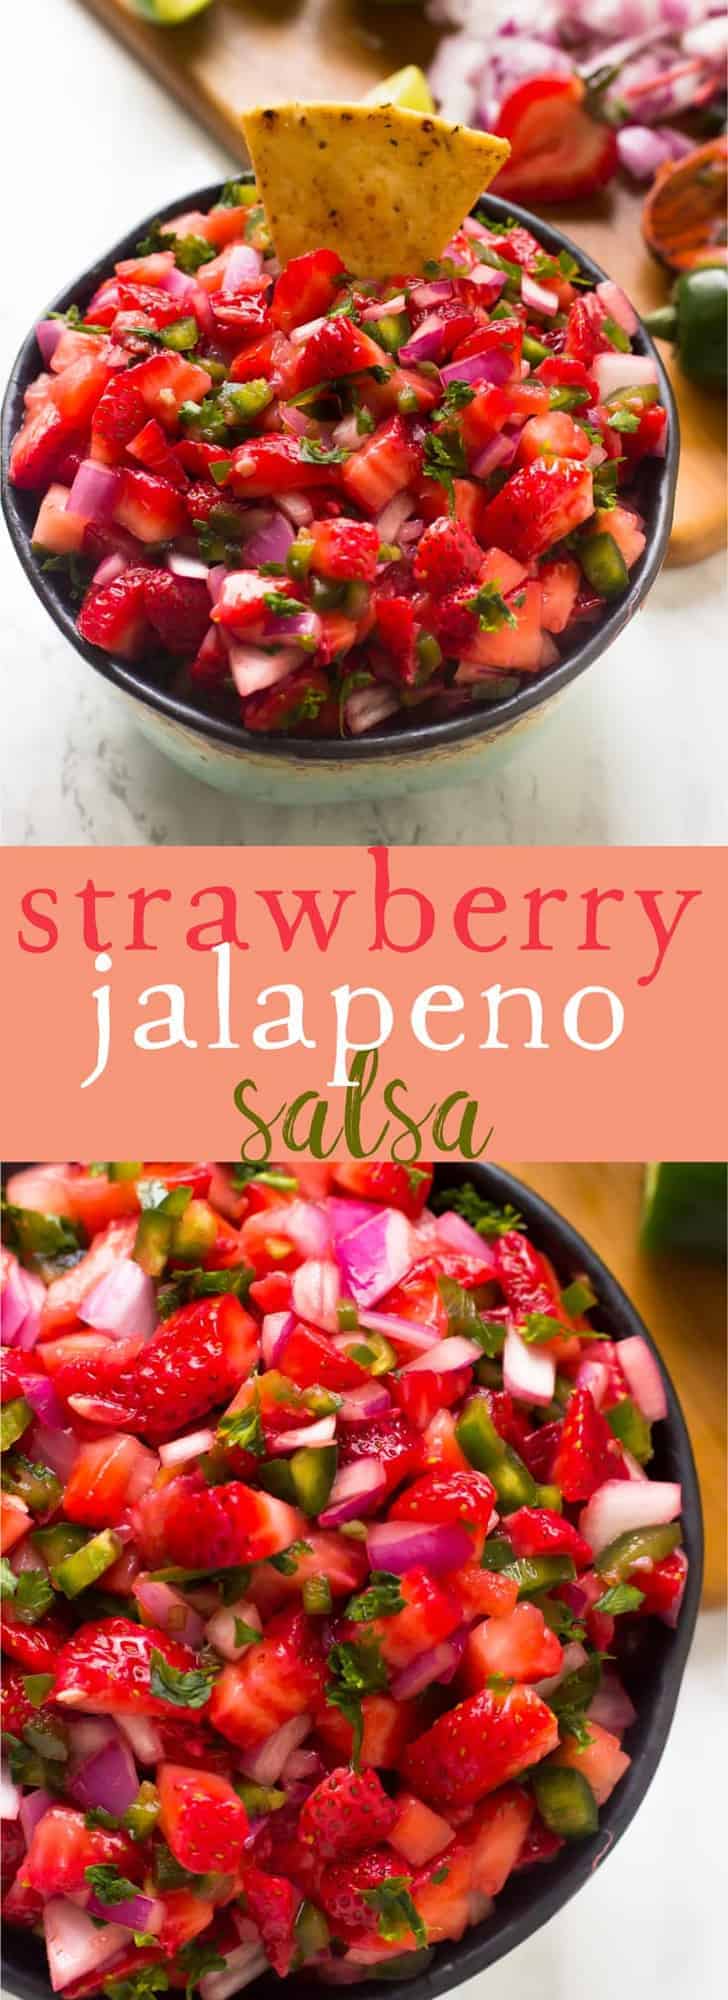 This Strawberry Jalapeno Salsa takes only 10 minutes with 5 ingredients! It's a delicious sweet and spicy salsa that is a total crowd pleaser and great for parties!